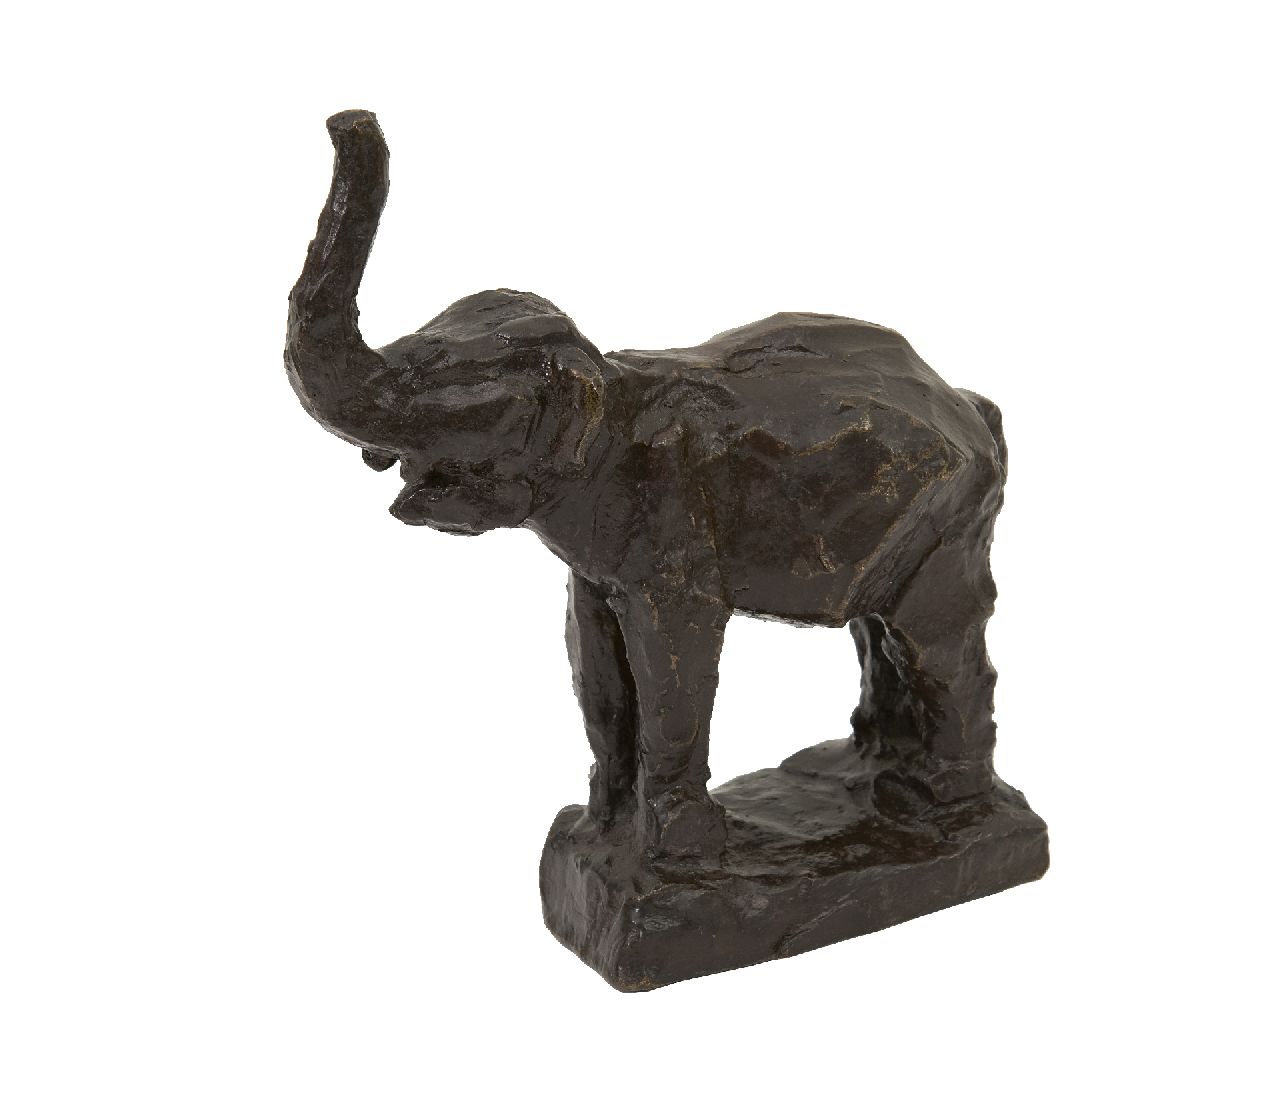 Zijl L.  | Lambertus Zijl | Sculptures and objects offered for sale | A baby elephant, patinated bronze 14.5 x 12.5 cm, signed with initials on the base and executed in 1916